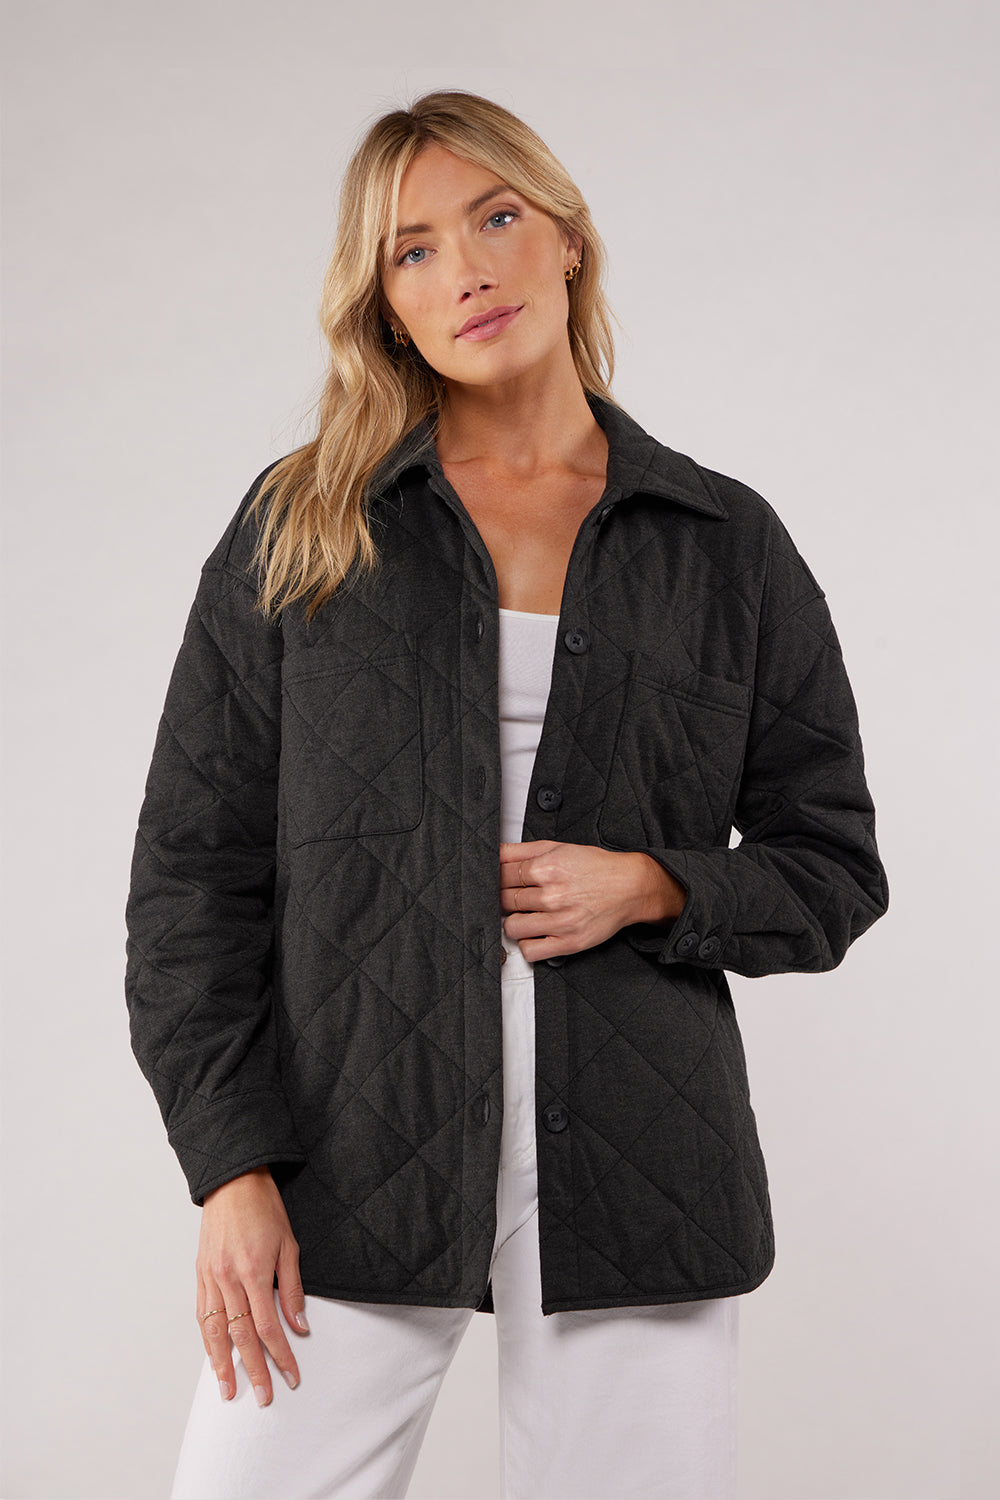 🥰 Matty M Anorak Jackets for $9.99!!! These would be so cute paired with  black leggings or jeans and boots 👢 love 💕 . . . . .